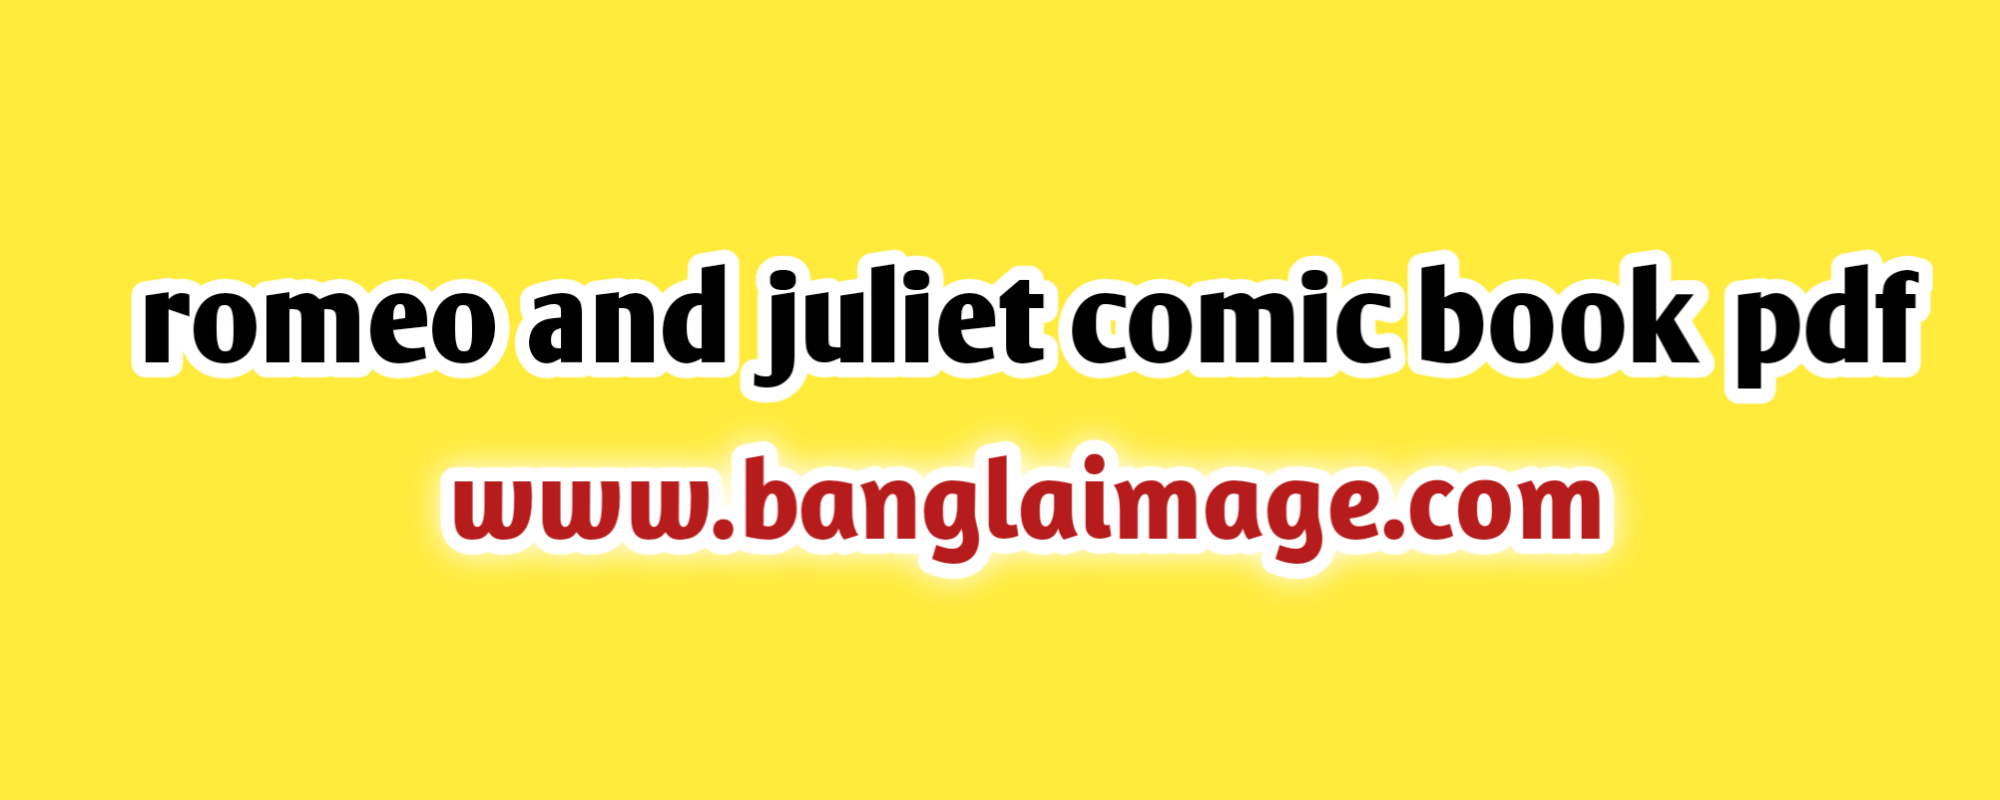 romeo and juliet comic book pdf, romeo and juliet graphic novel sparknotes, romeo and juliet graphic novel summary, the romeo and juliet graphic novel sparknotes